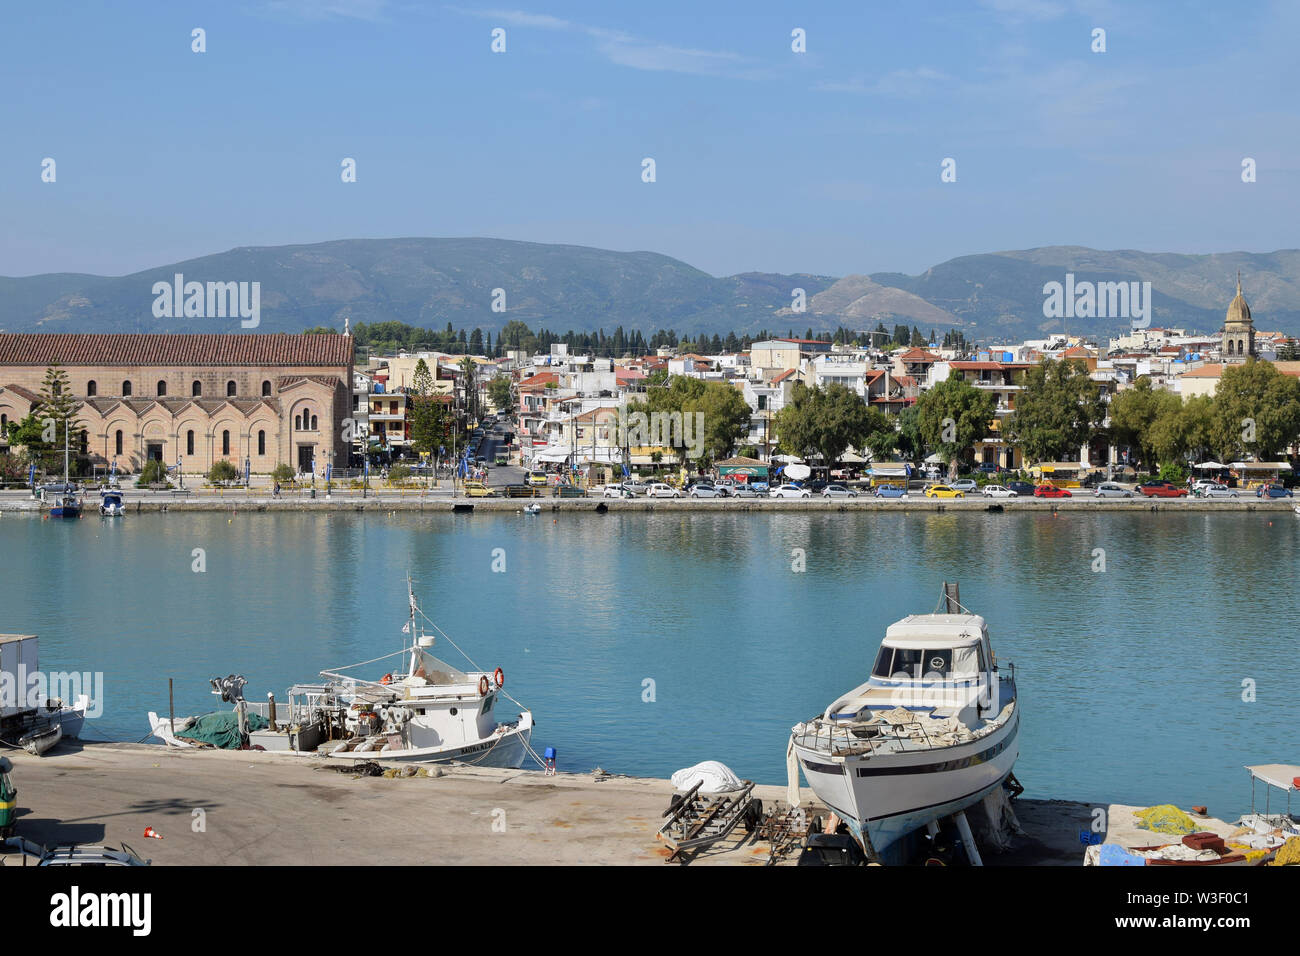 ZAKYNTHOS, GREECE - AUGUST 23, 2018: View of Zakynthos town and fishing boats at the port. Stock Photo